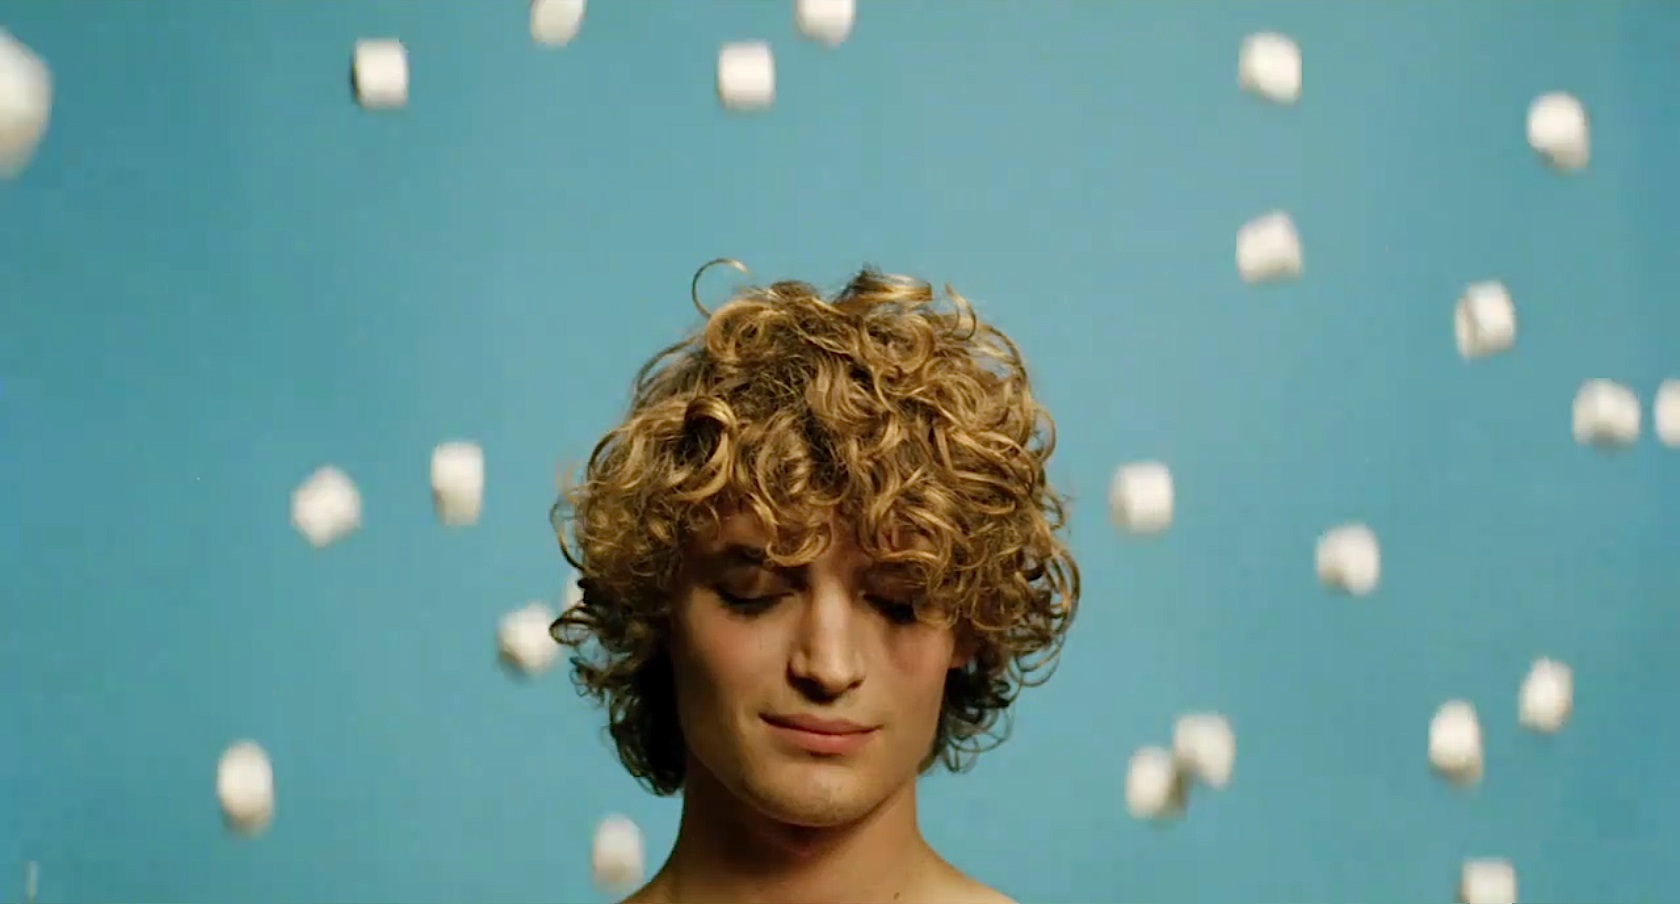 Les Amours imaginaires - Wikipedia